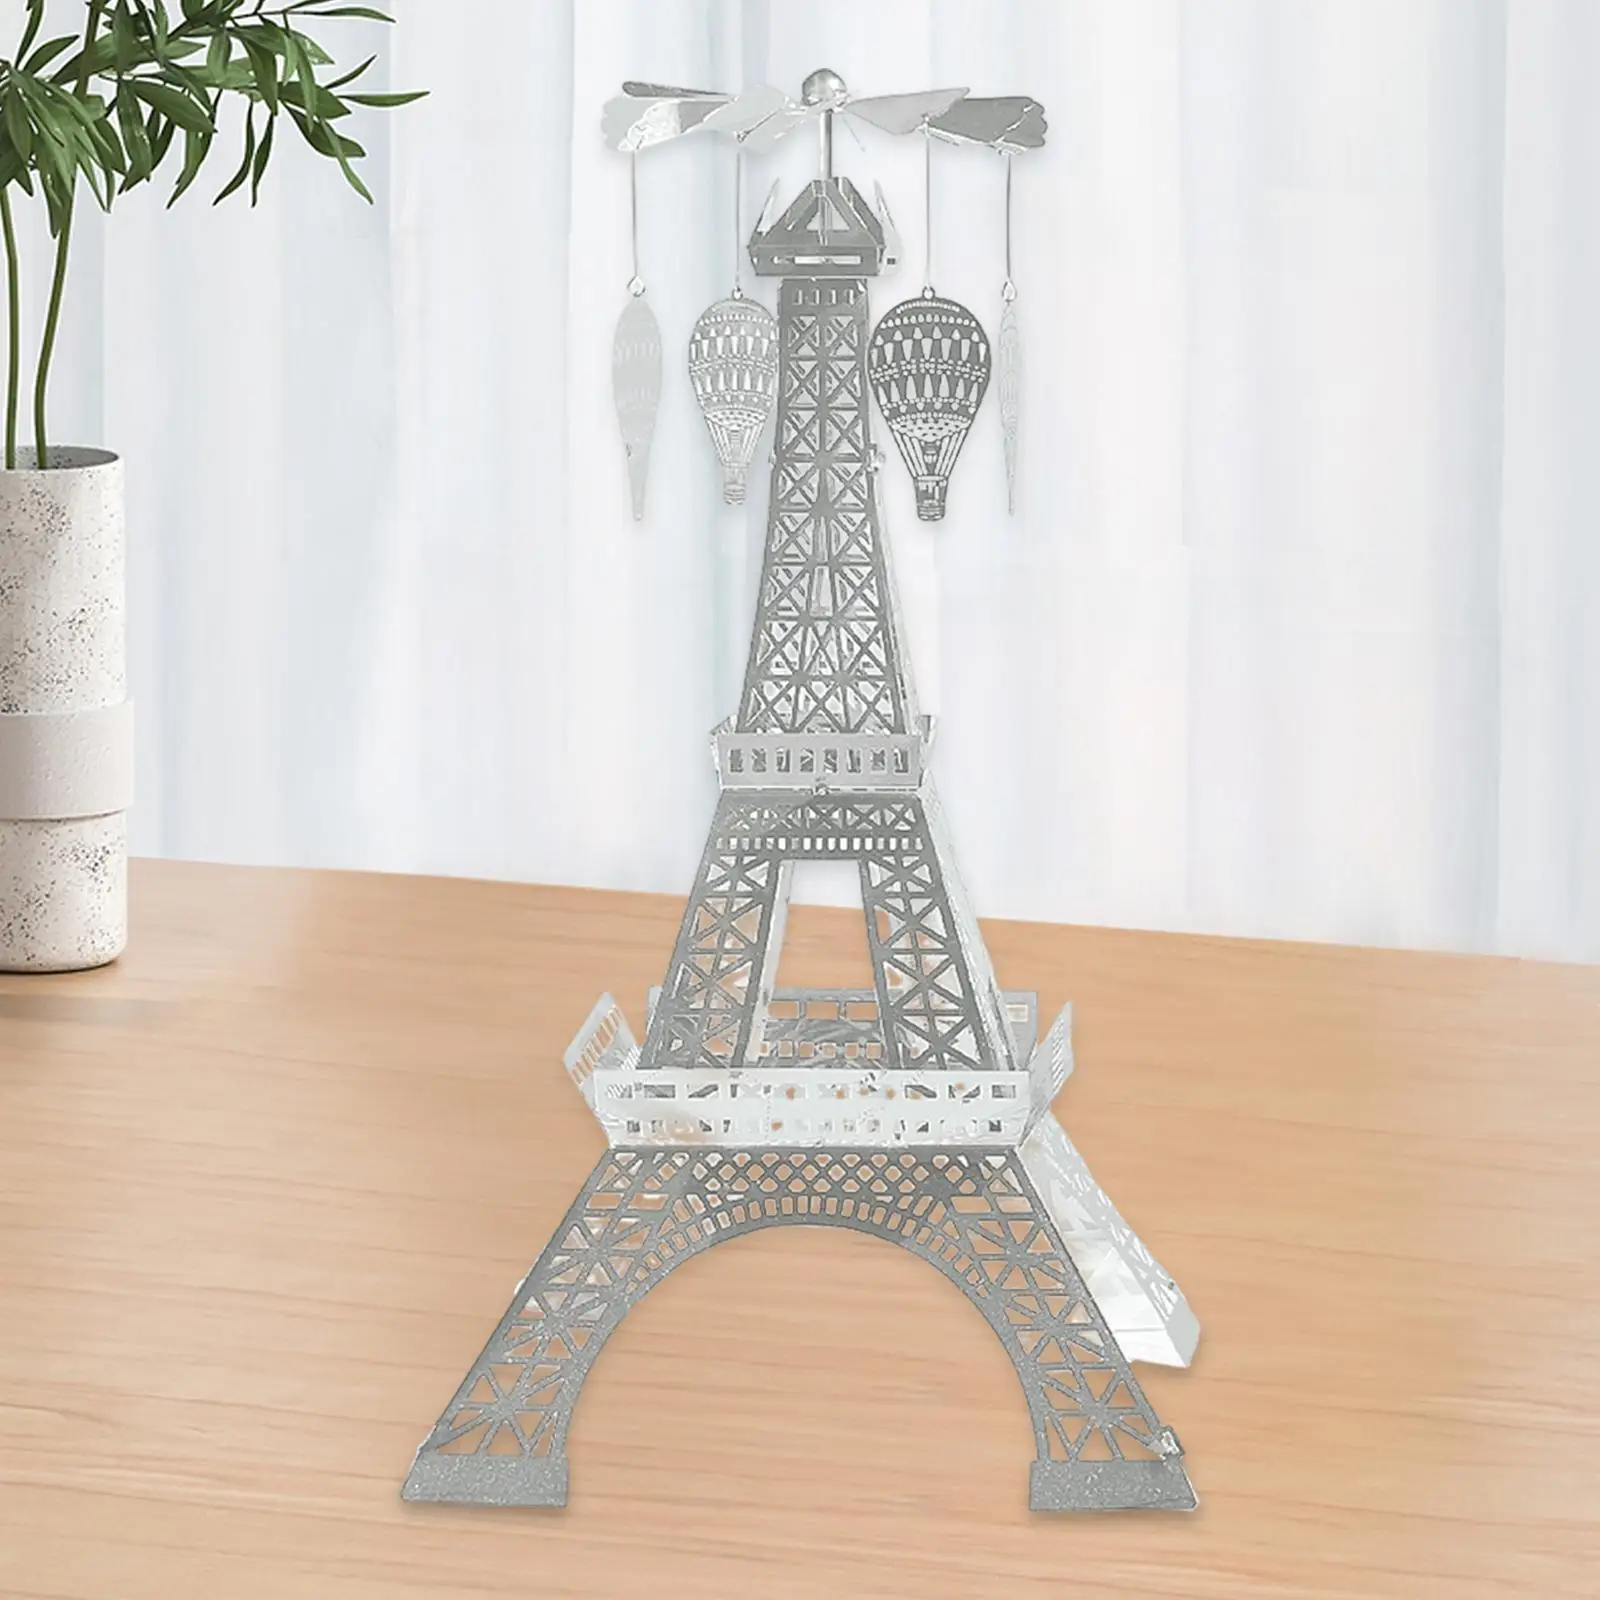 Eiffel Tower Figurine Candle Holder Table Crafts Adornment for Valentine Day Lovely Decor Home Party Supplies